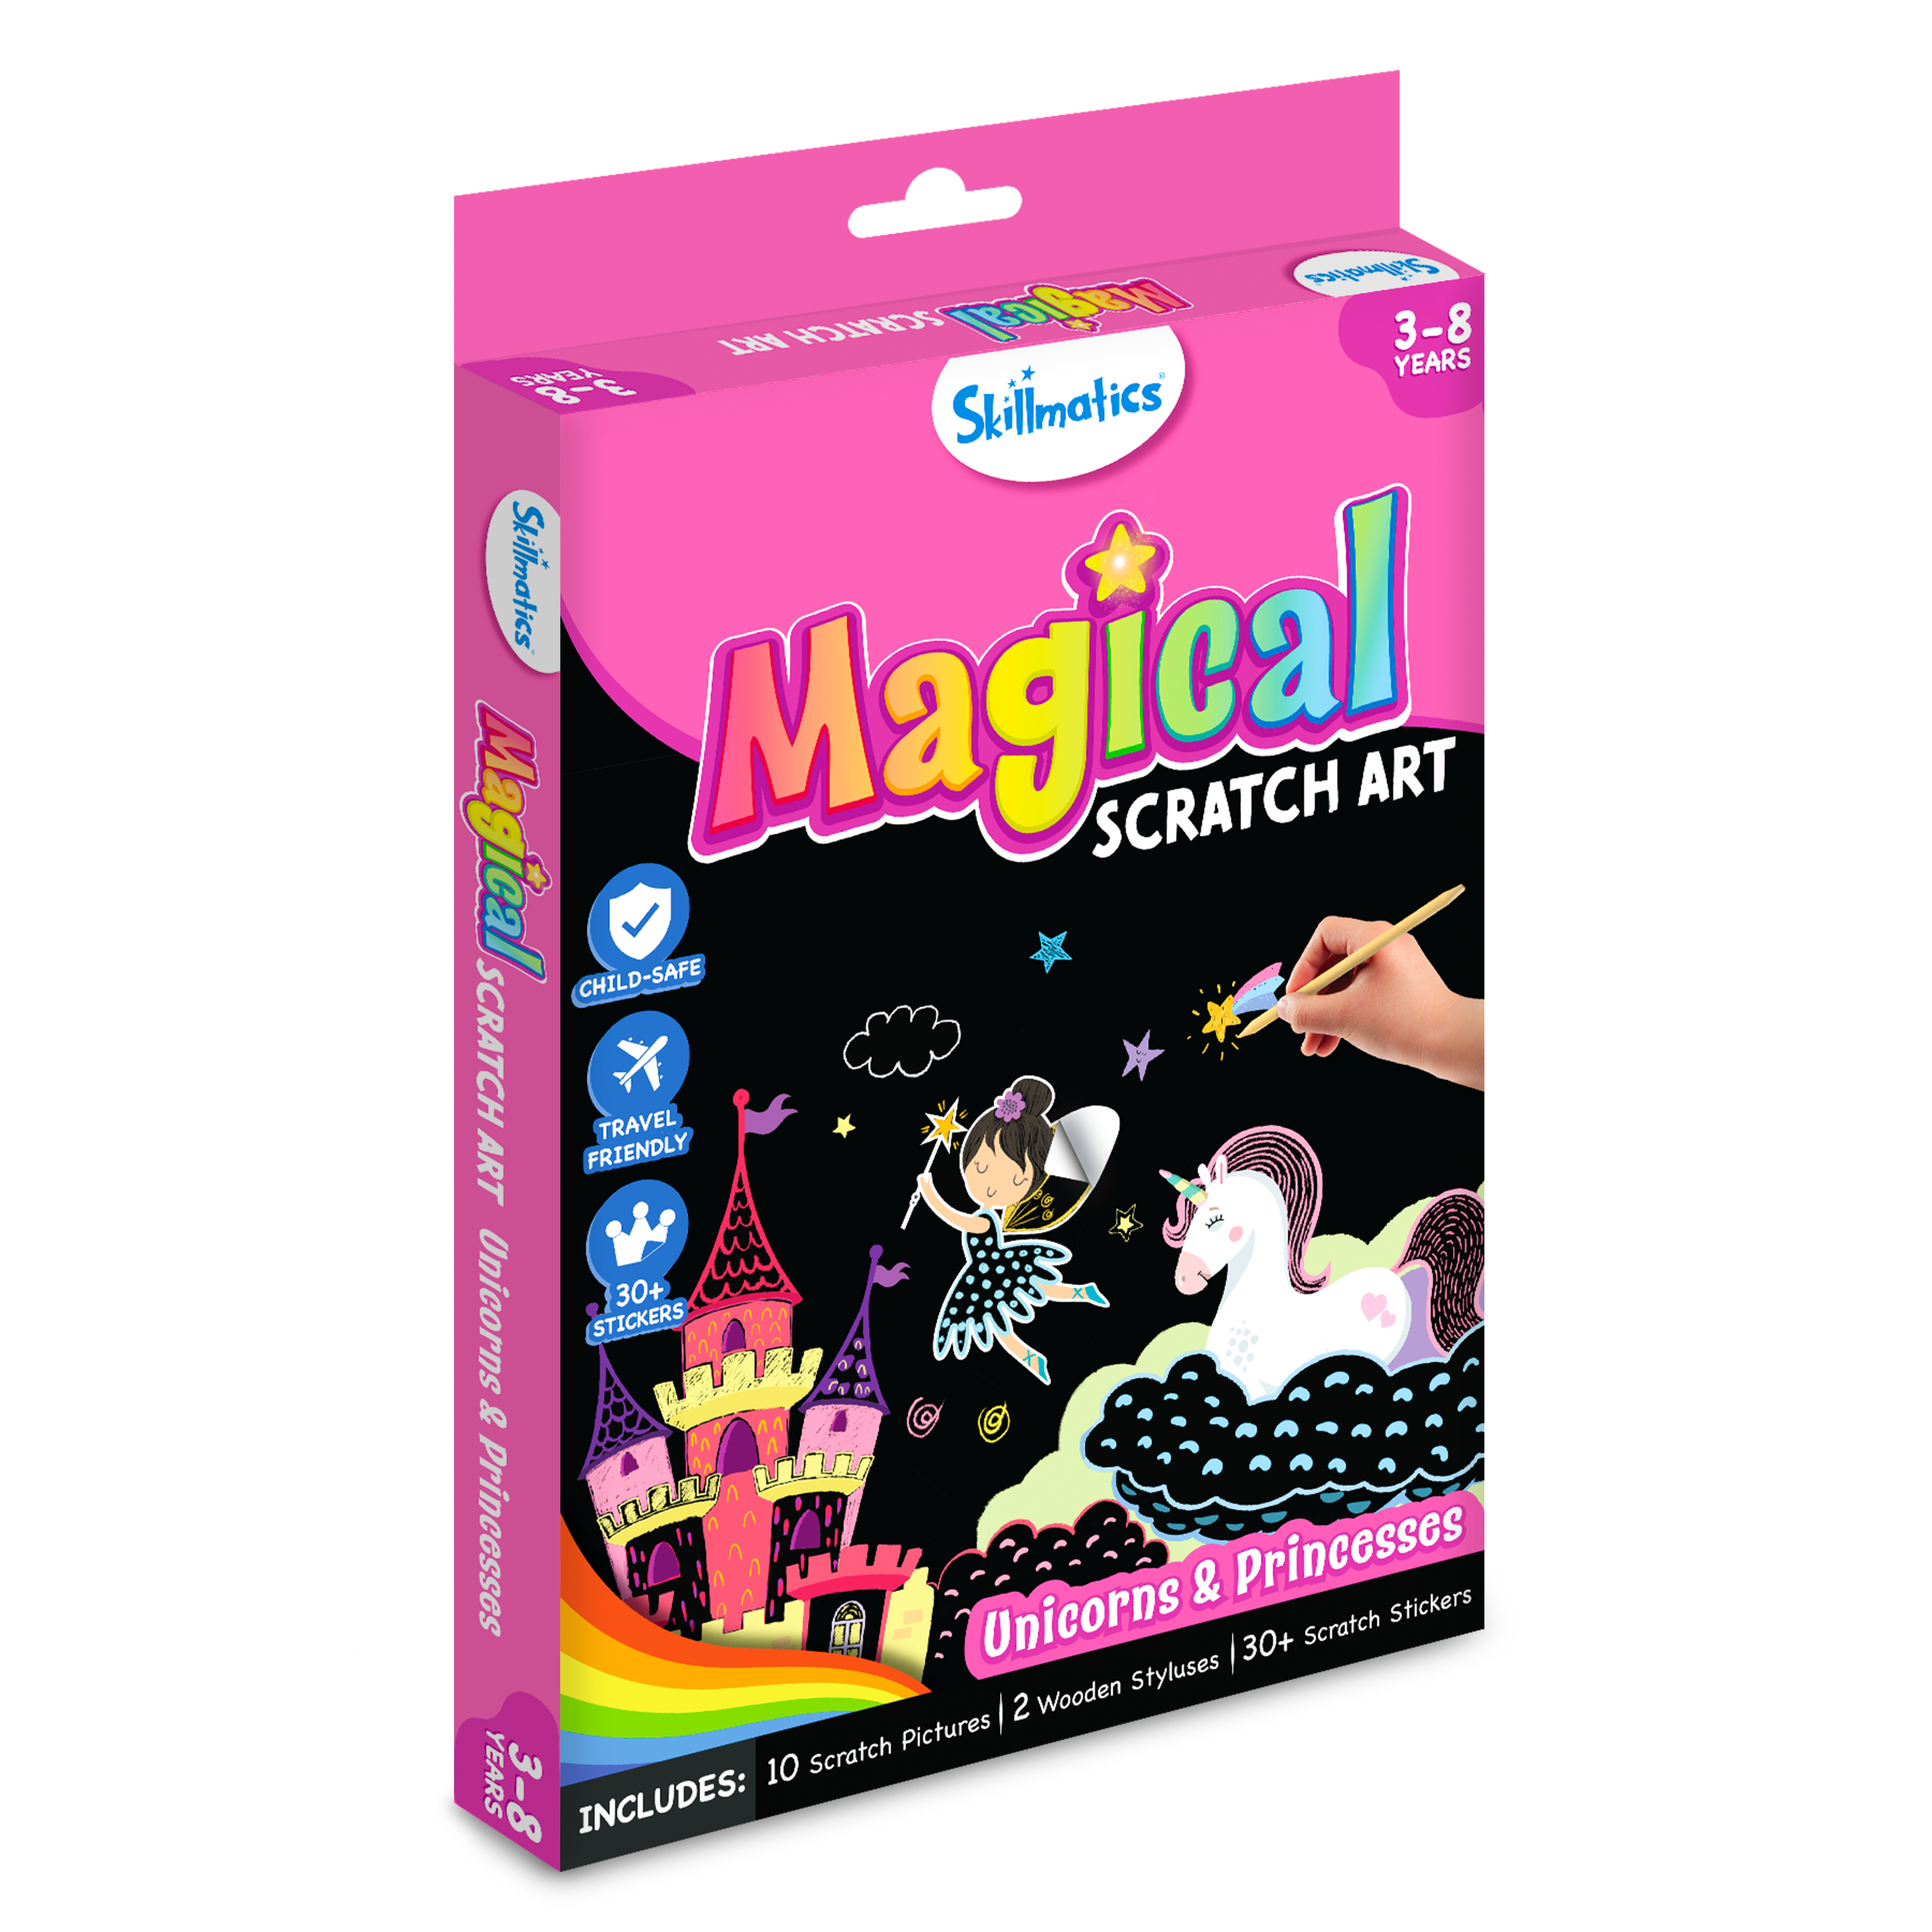 Skillmatics Magical Scratch Art Book for Kids - Unicorns & Princesses, Craft Kits, DIY Activity & Stickers, Gifts for Ages 3 to 8